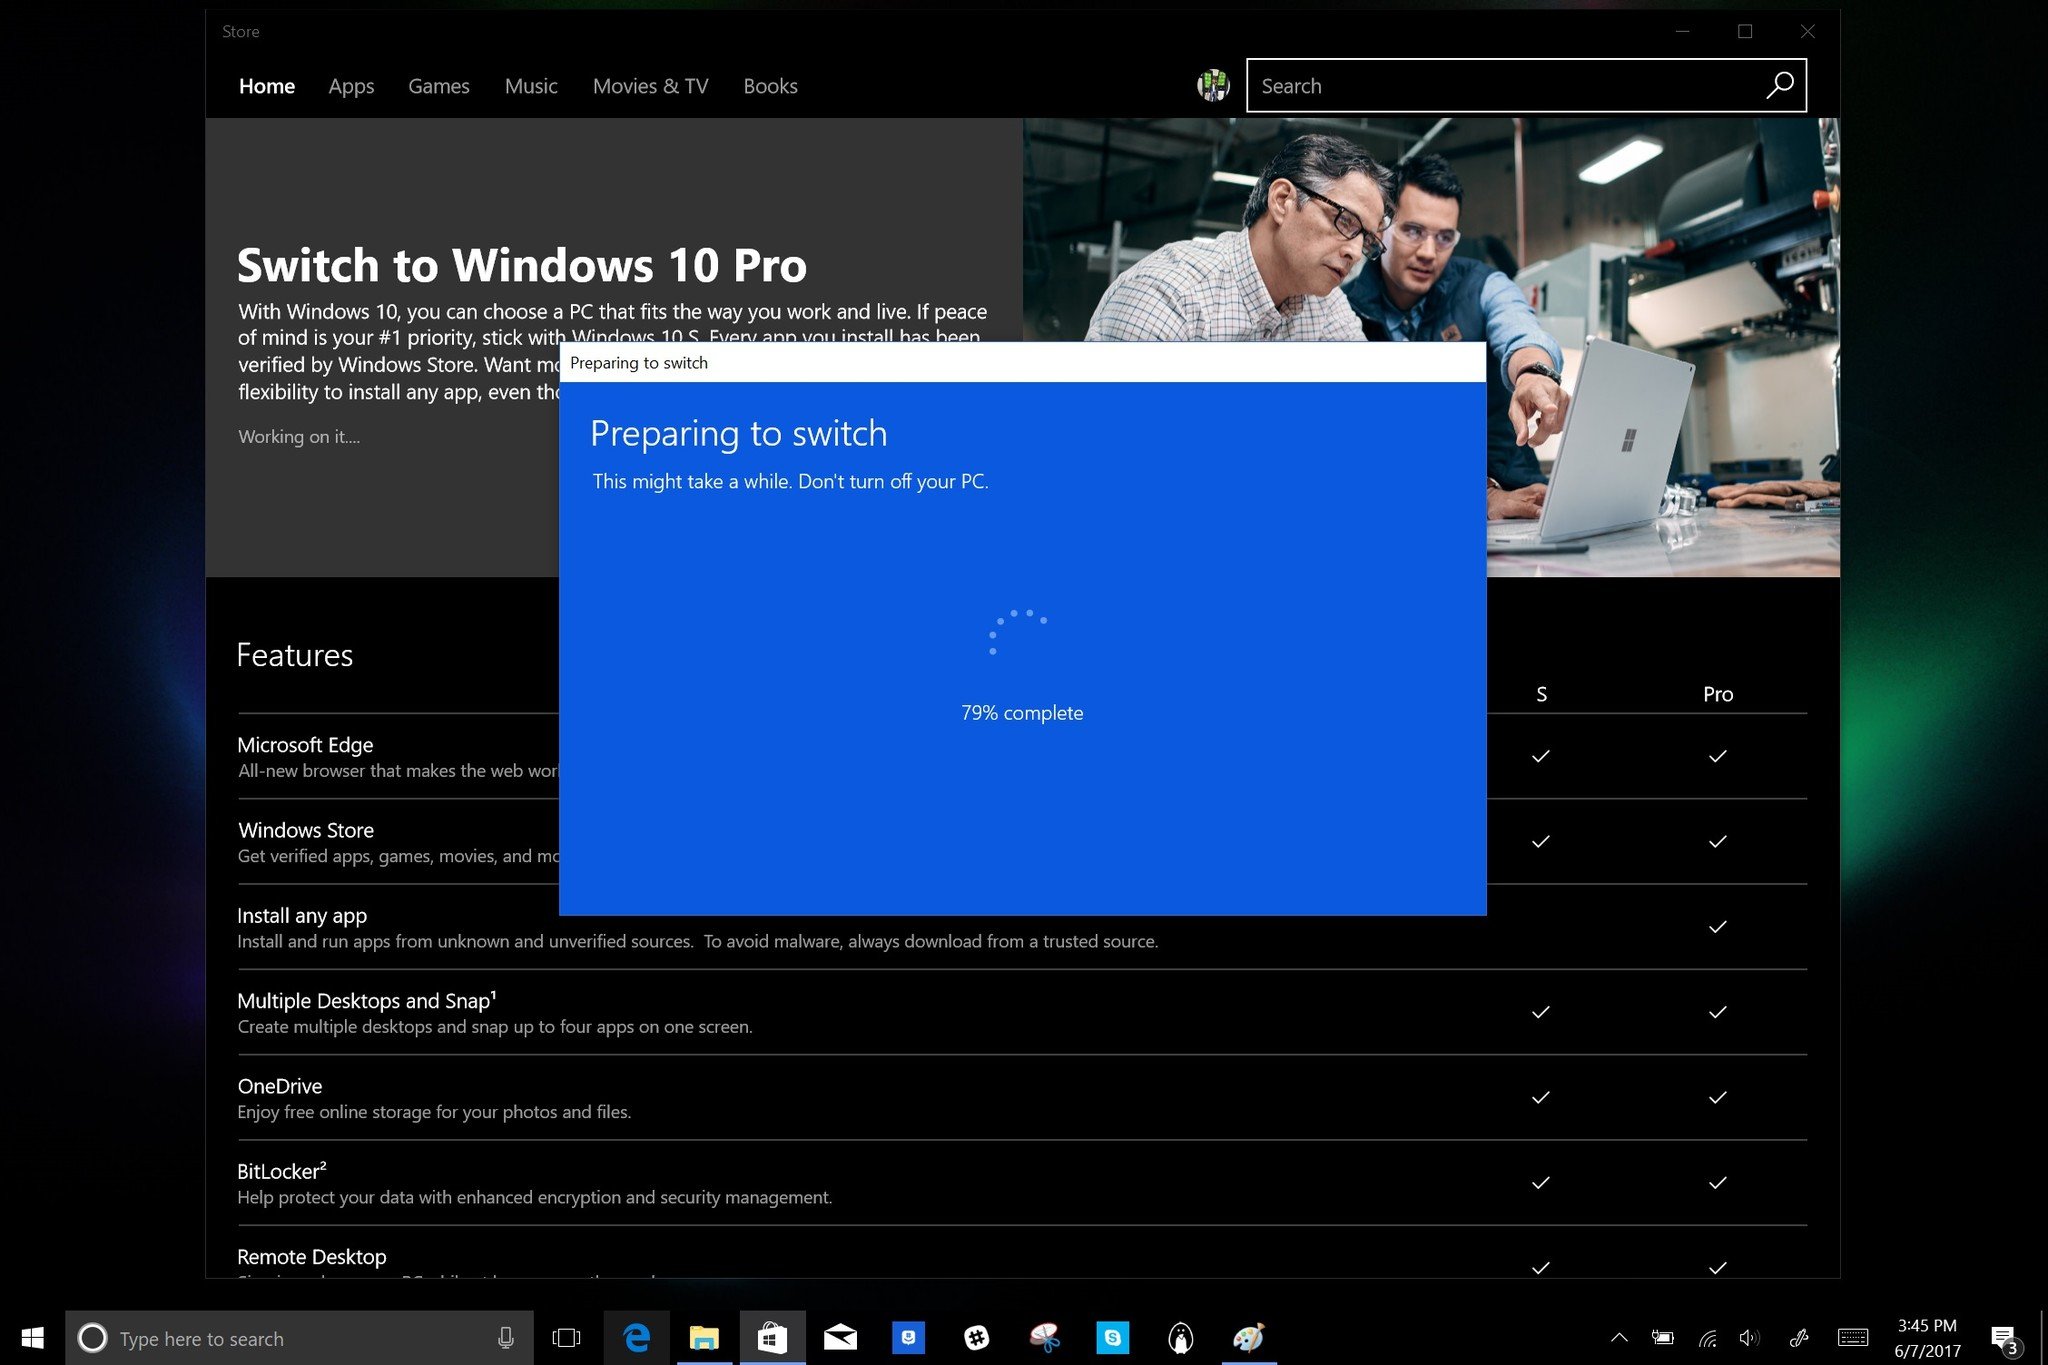 cost to upgrade from windows 7 to windows 10 pro